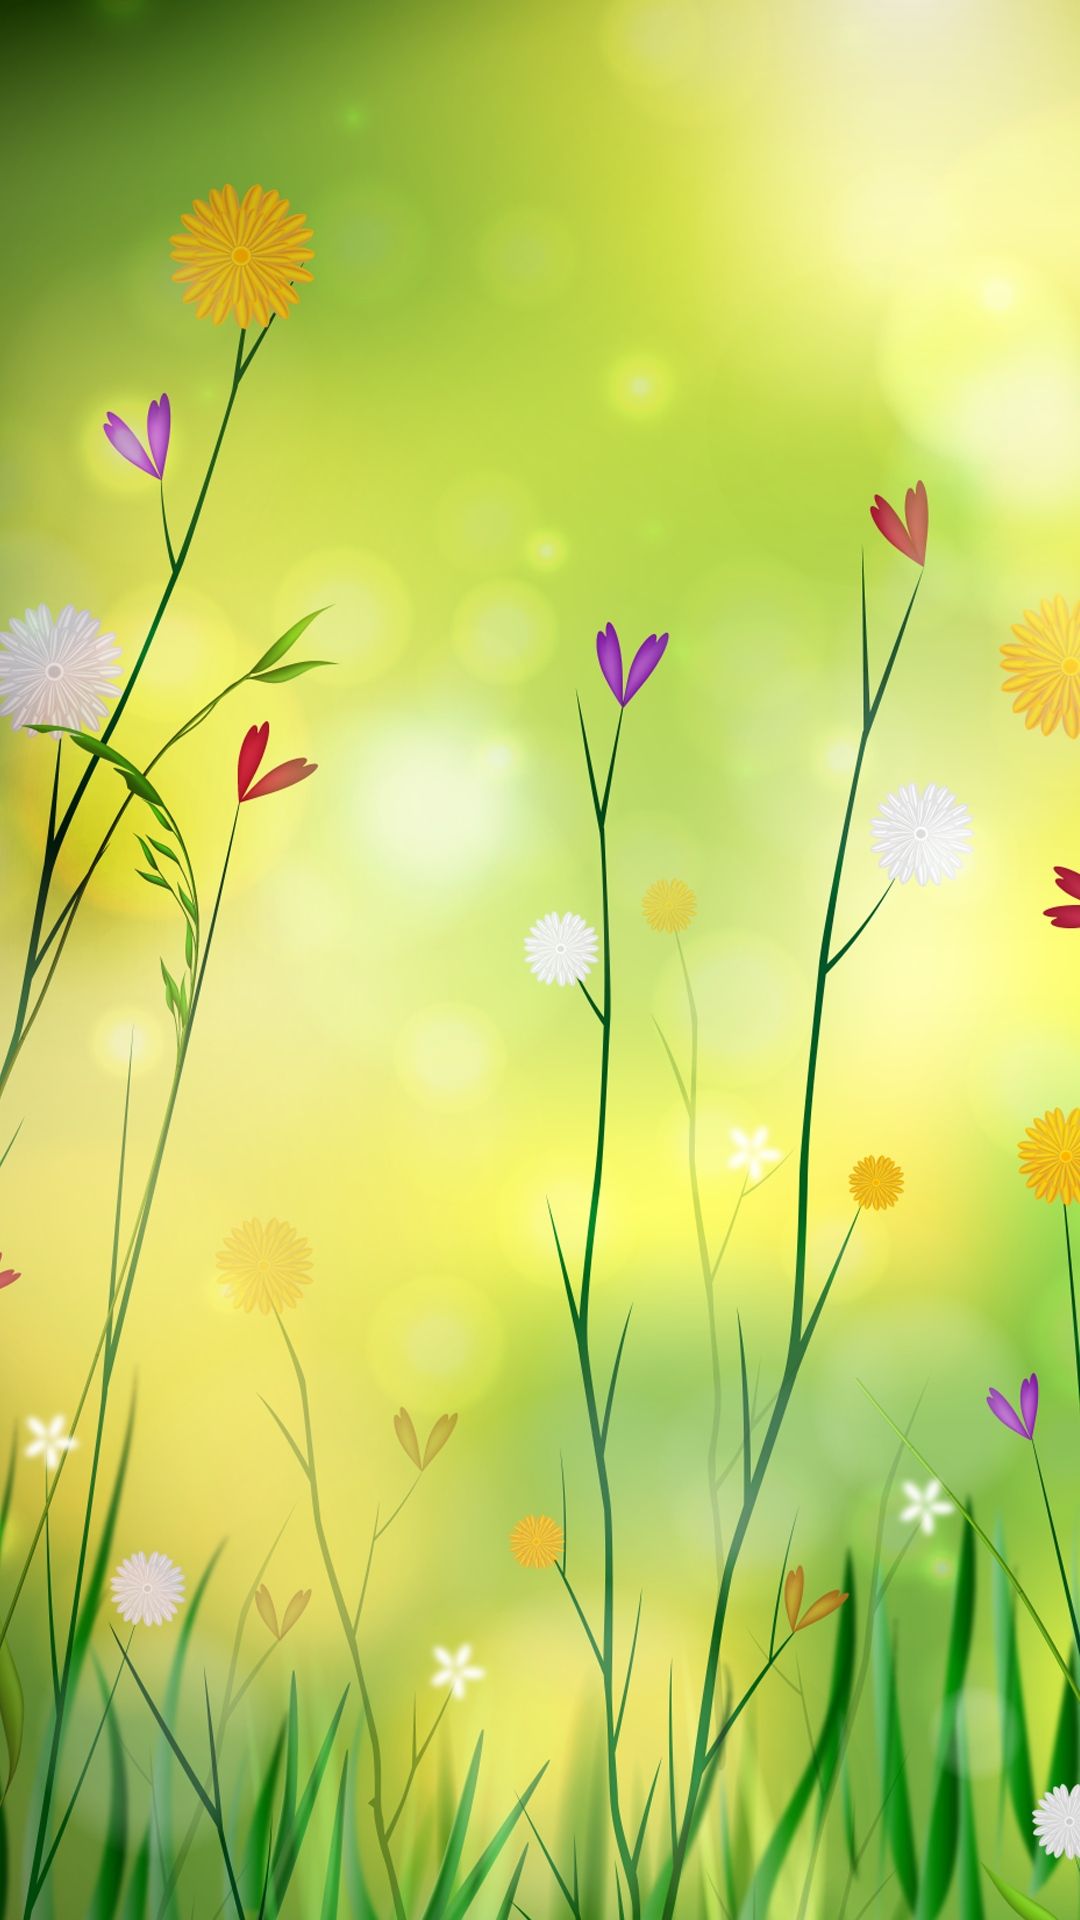 A wallpaper of a grassy field with flowers - Spring